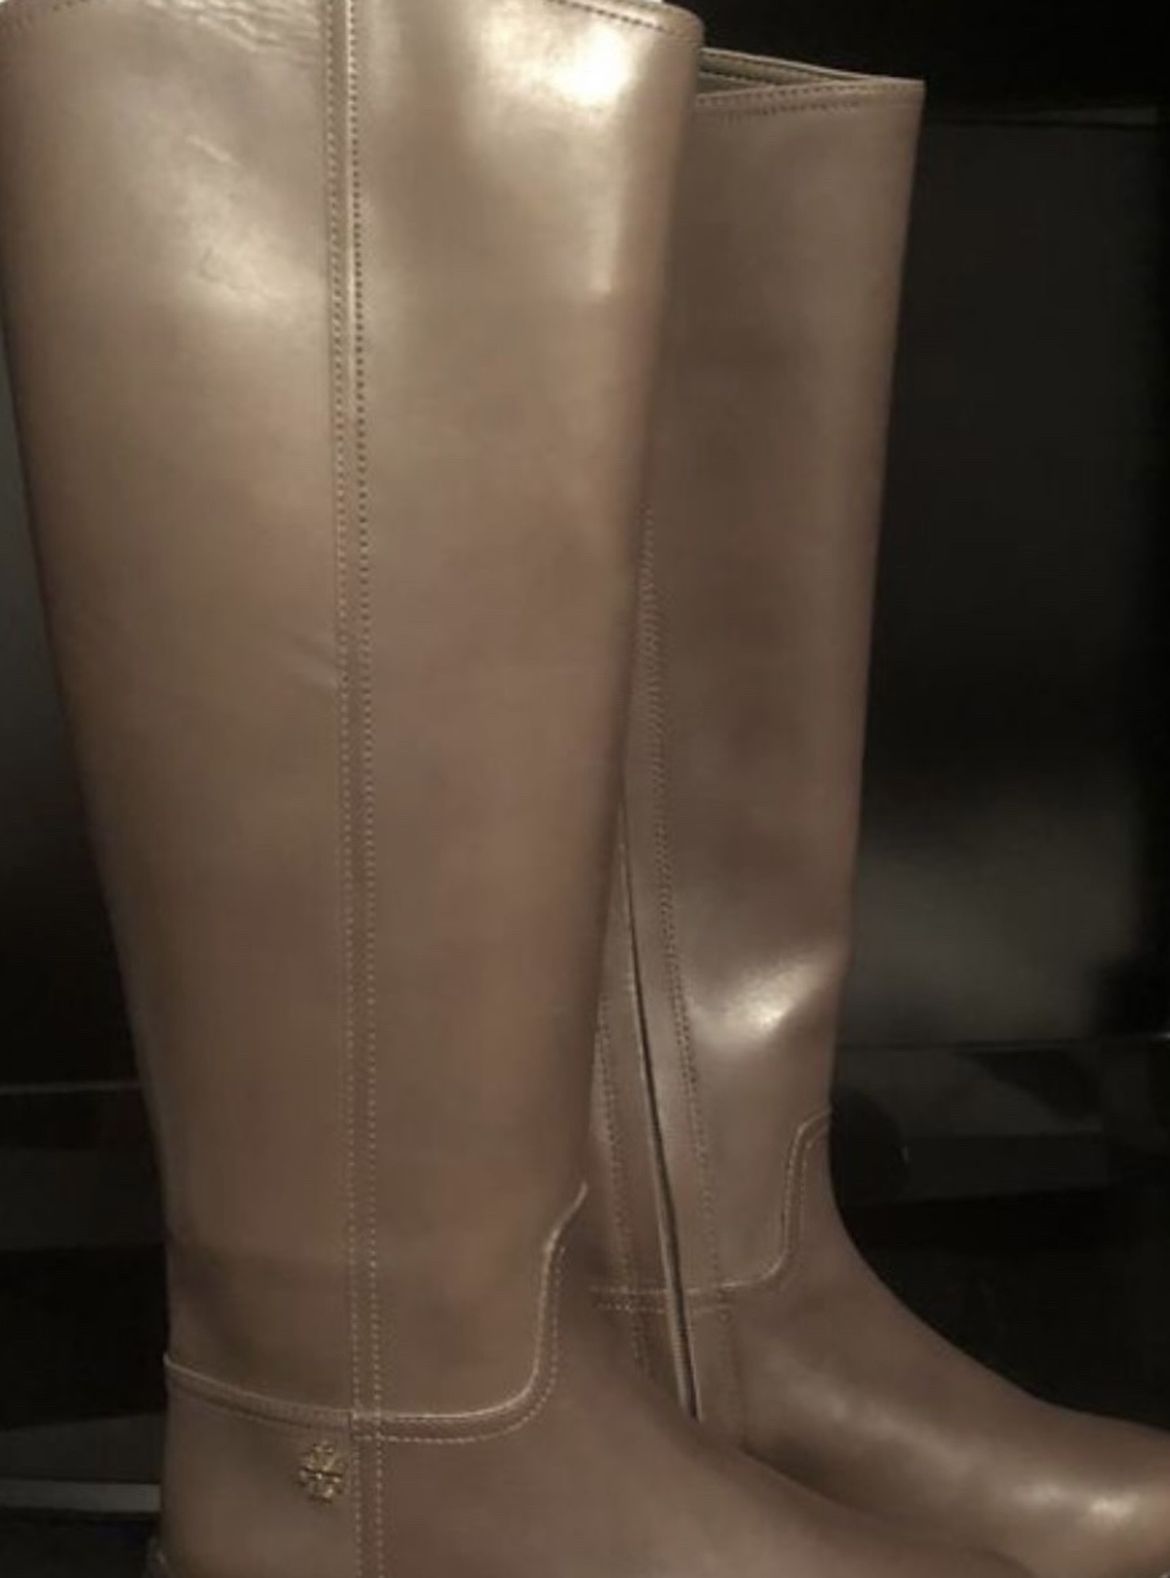 Tory Burch Boots - Brand New